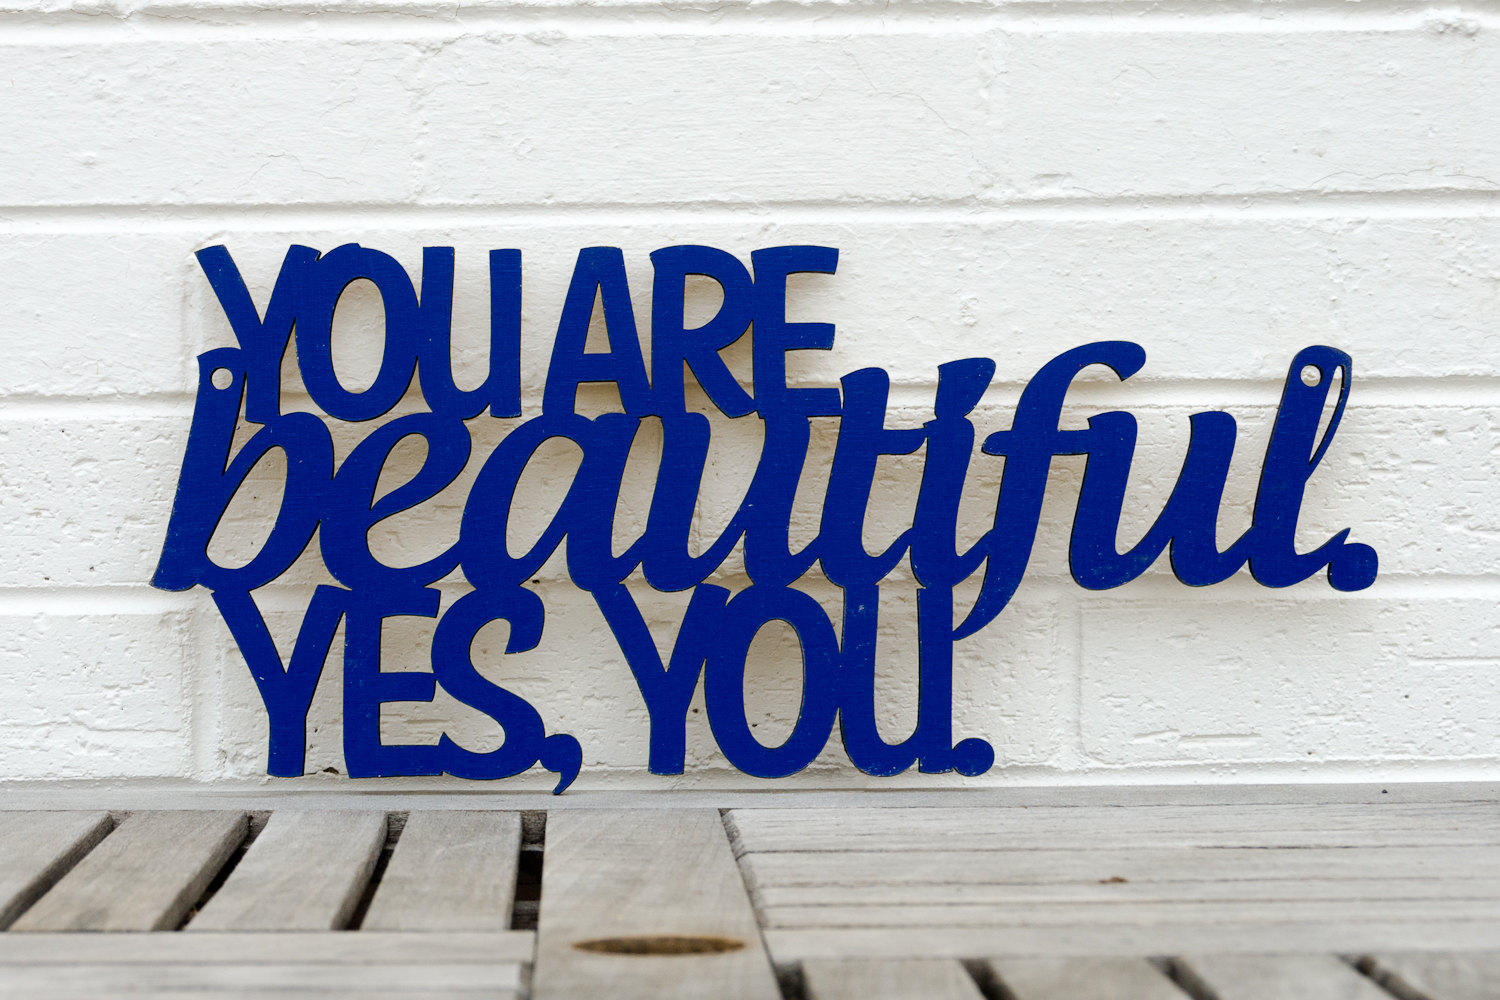 You are always beautiful